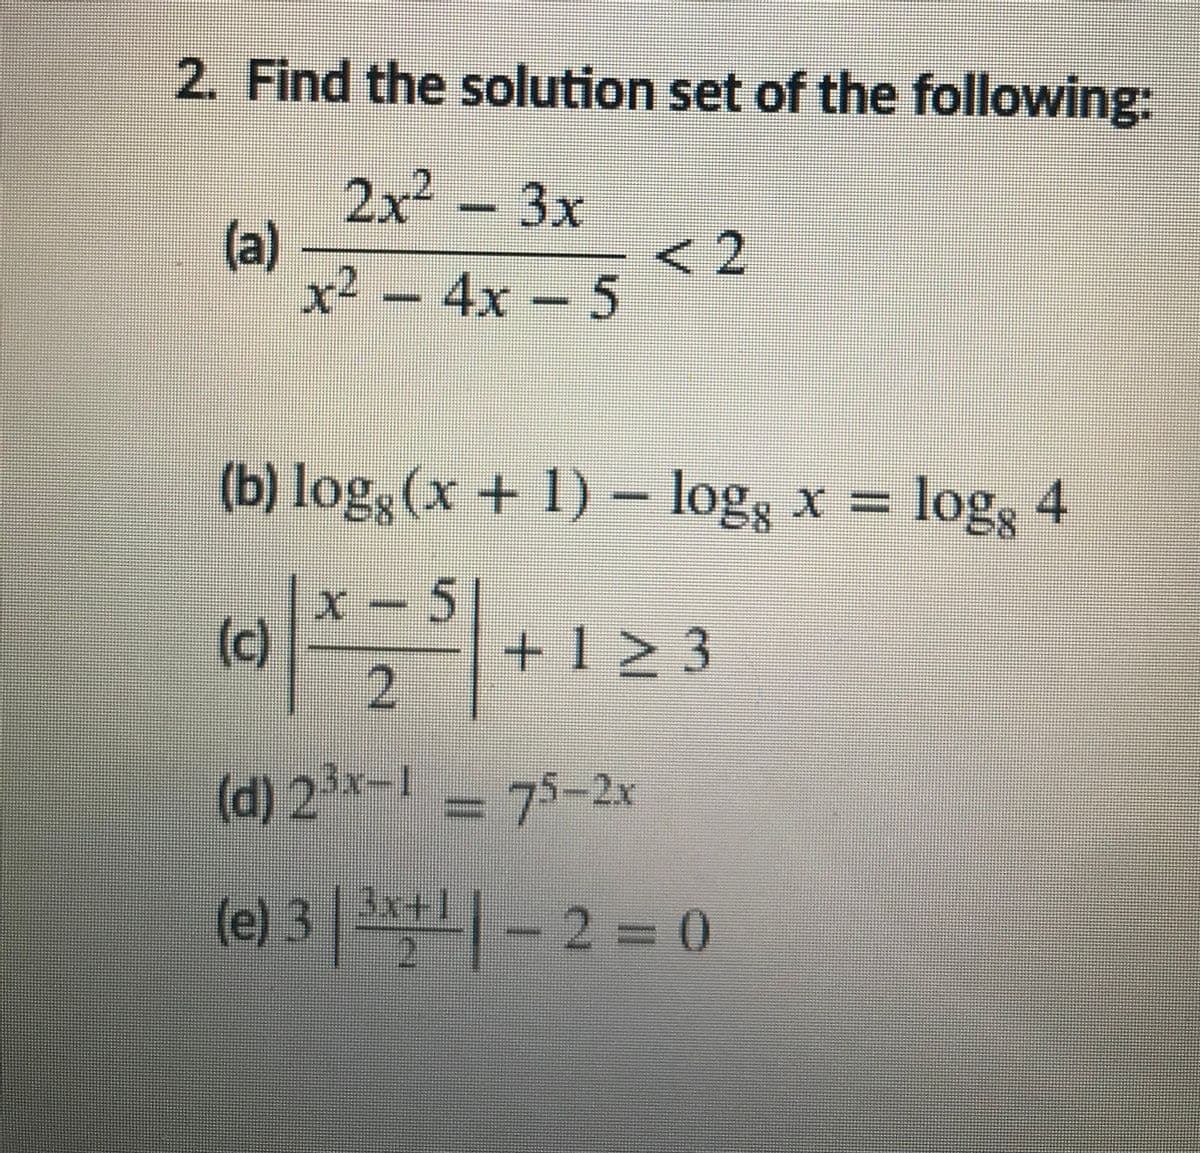 2. Find the solution set of the following:
2x²
(a)
x² – 4x – 5
3x
(b) log, (x + 1)
- log3 x = log3 4
(c)
x -5|
+1 2 3
(d) 2³x-1 = 75-2x
3x+1
(e)
3 +-2 = 0
寸
2.
